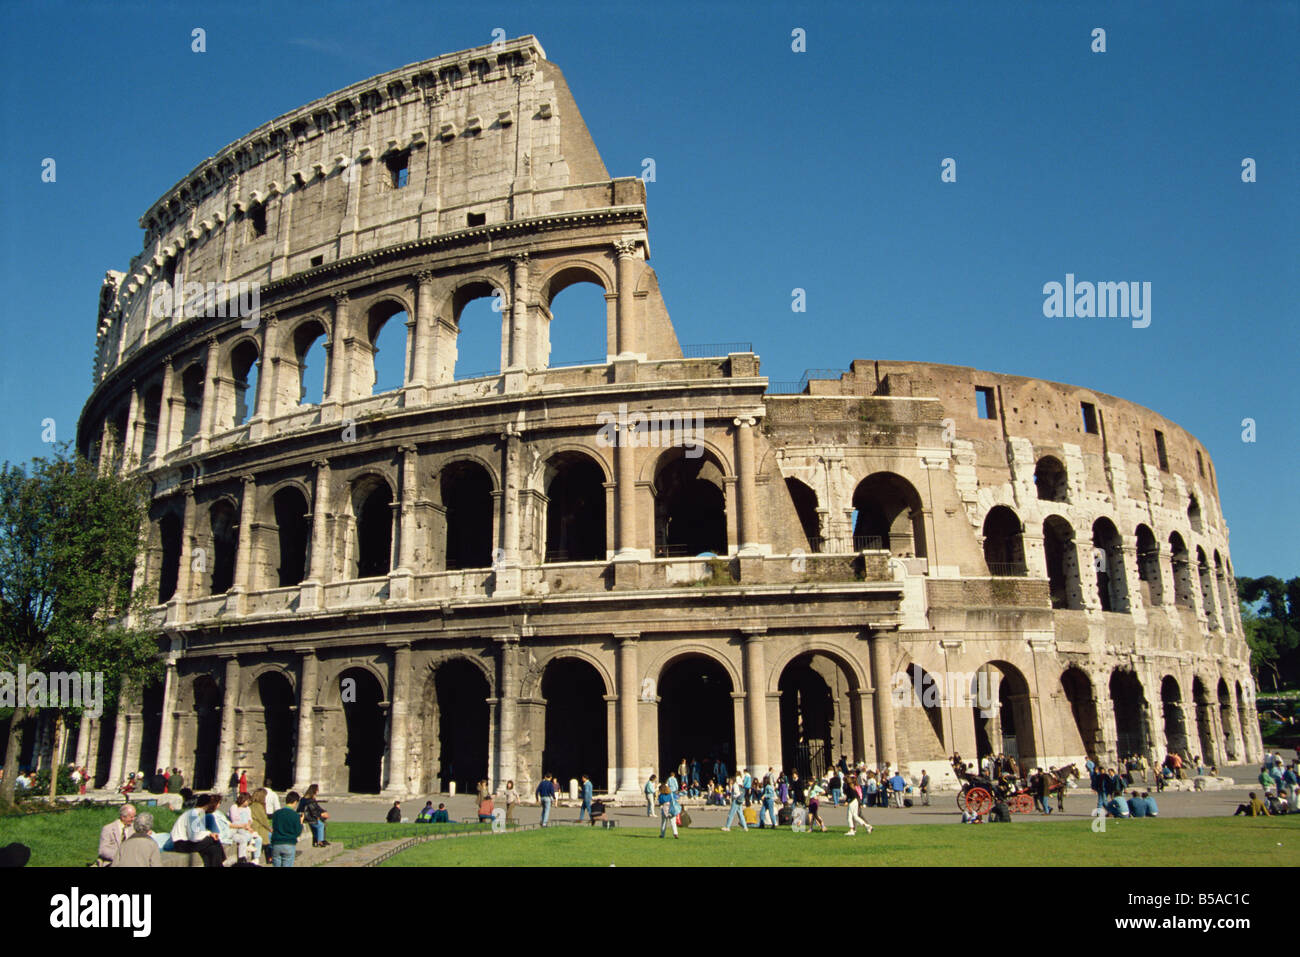 The exterior of the Colosseum in Rome Lazio Italy S Terry Stock Photo